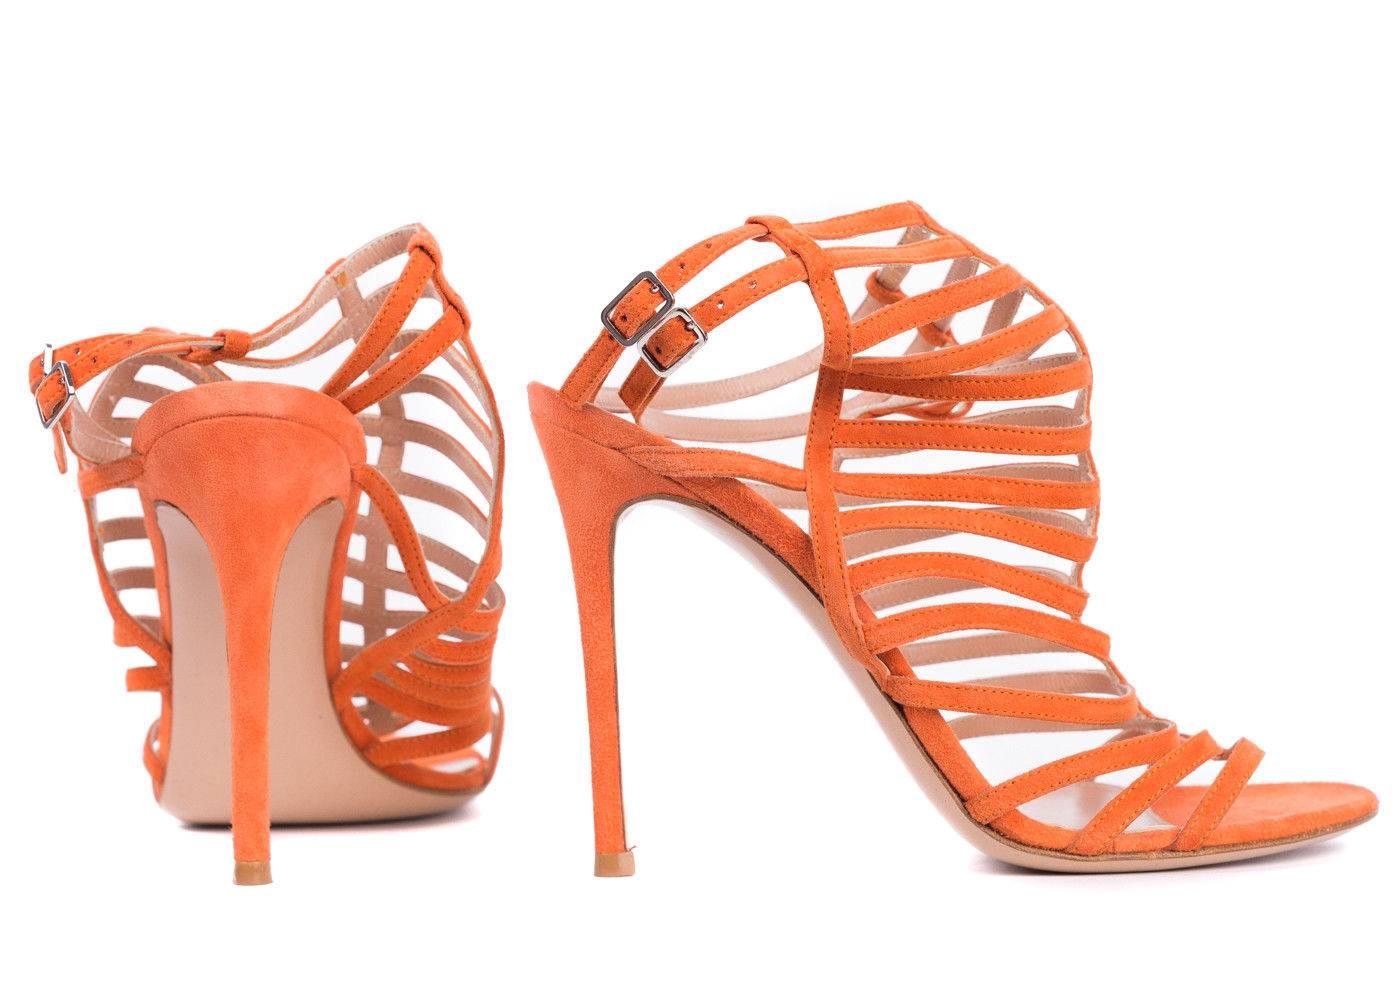  Gianvito-Rossi-Orange-Suede-Caged-Ankle-Strap-Stiletto-Sandals In New Condition For Sale In Brooklyn, NY